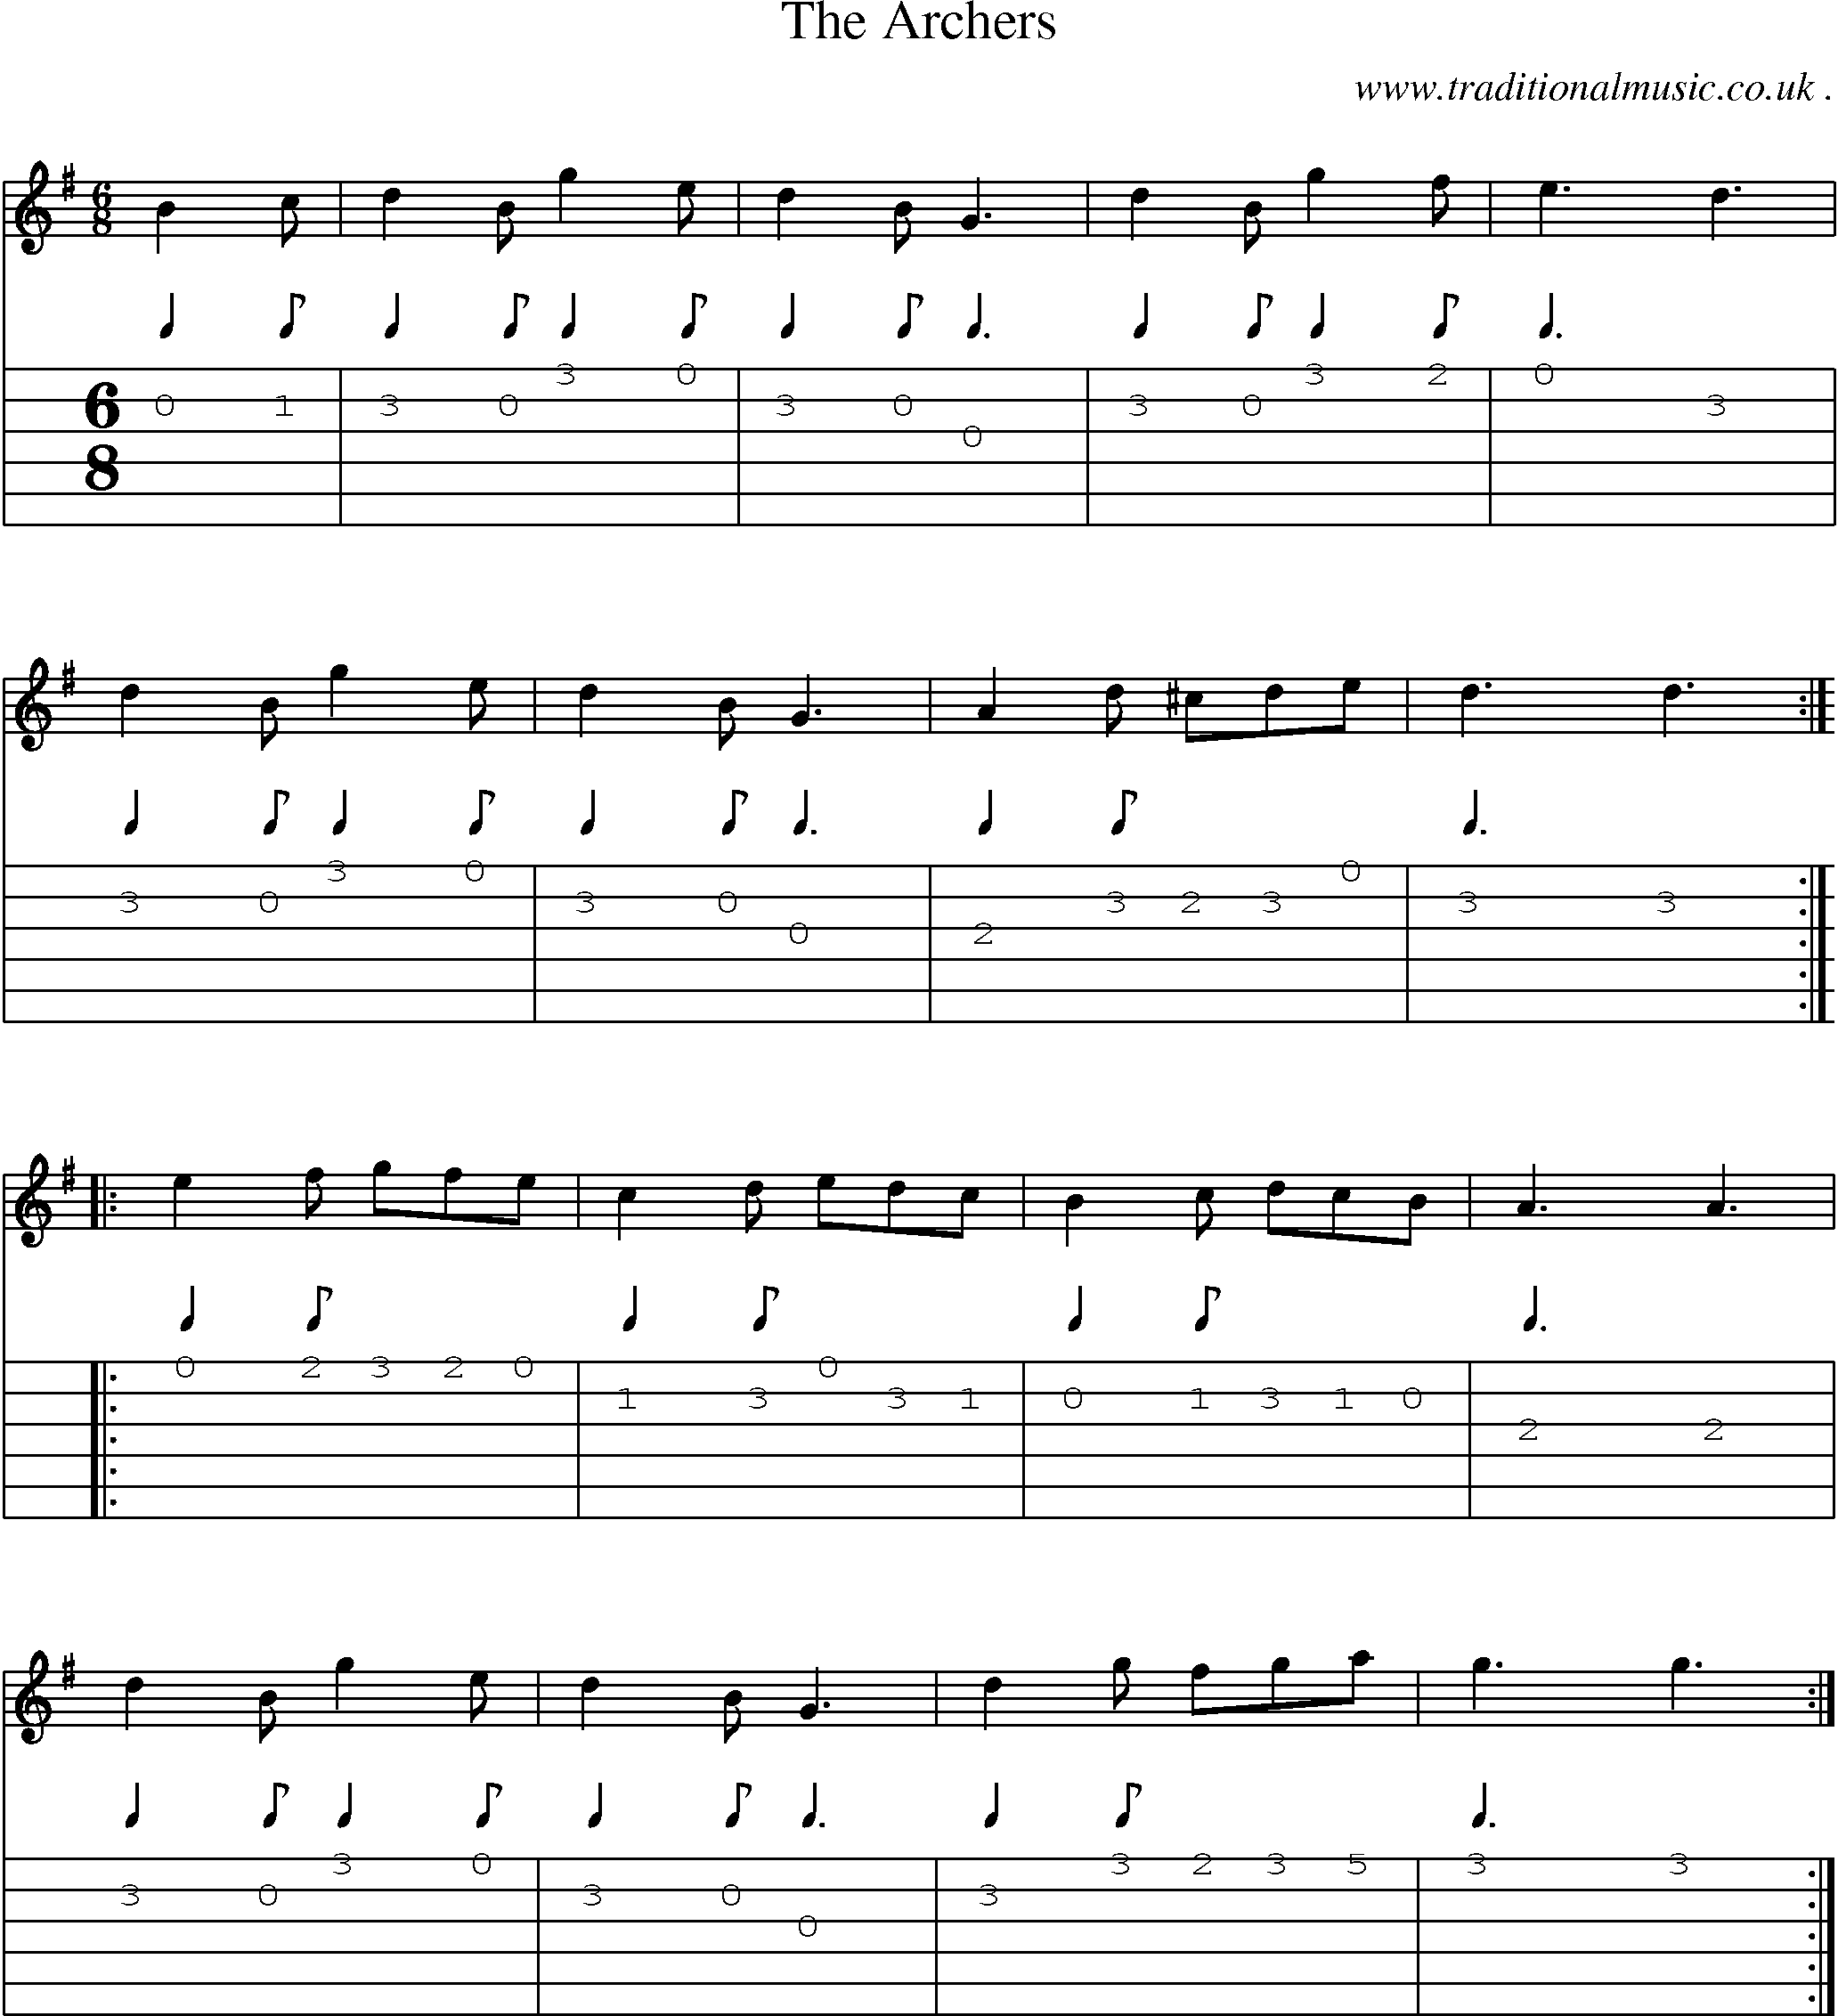 Sheet-Music and Guitar Tabs for The Archers